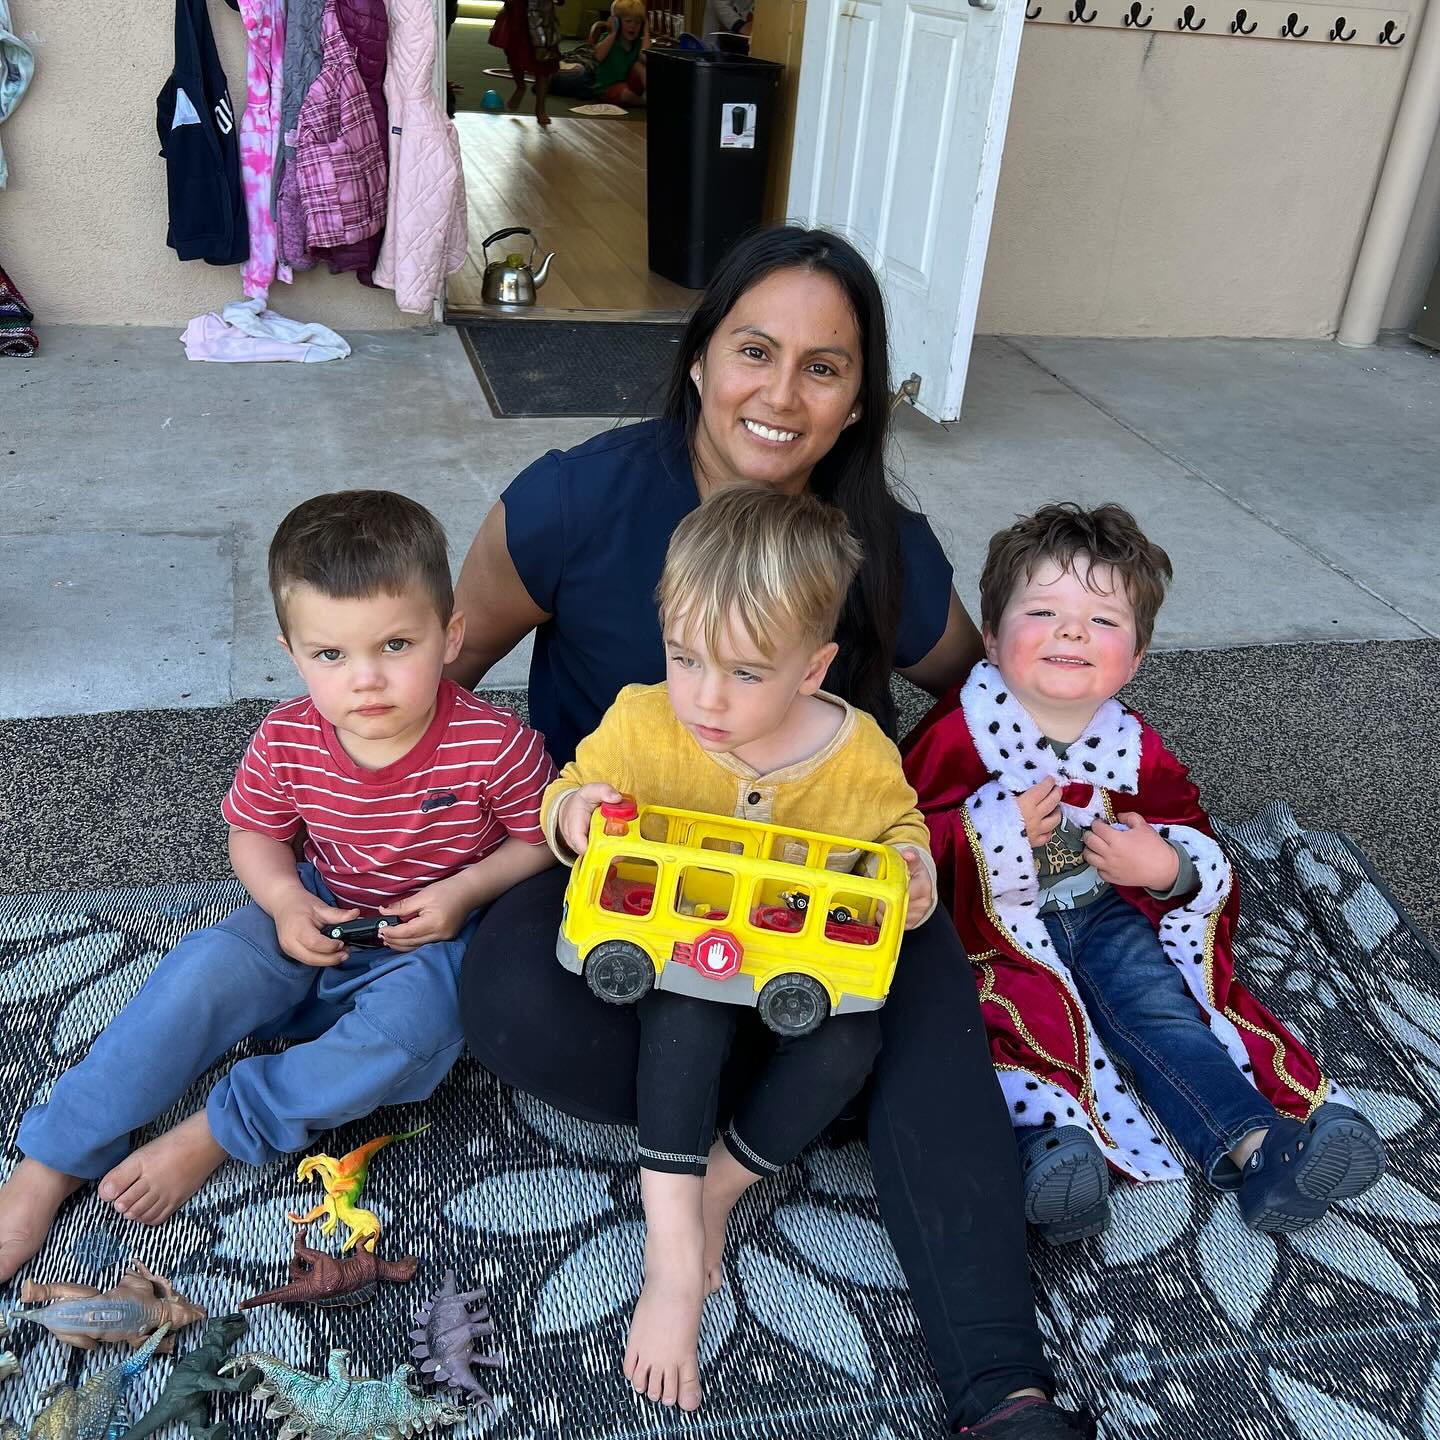 Today we recognize Miss Norma and Mr Santos, our 2-3 year old teachers! They are intentional about creating fun circle time activities, getting out to take walks, and helping your children feel seen and heard.